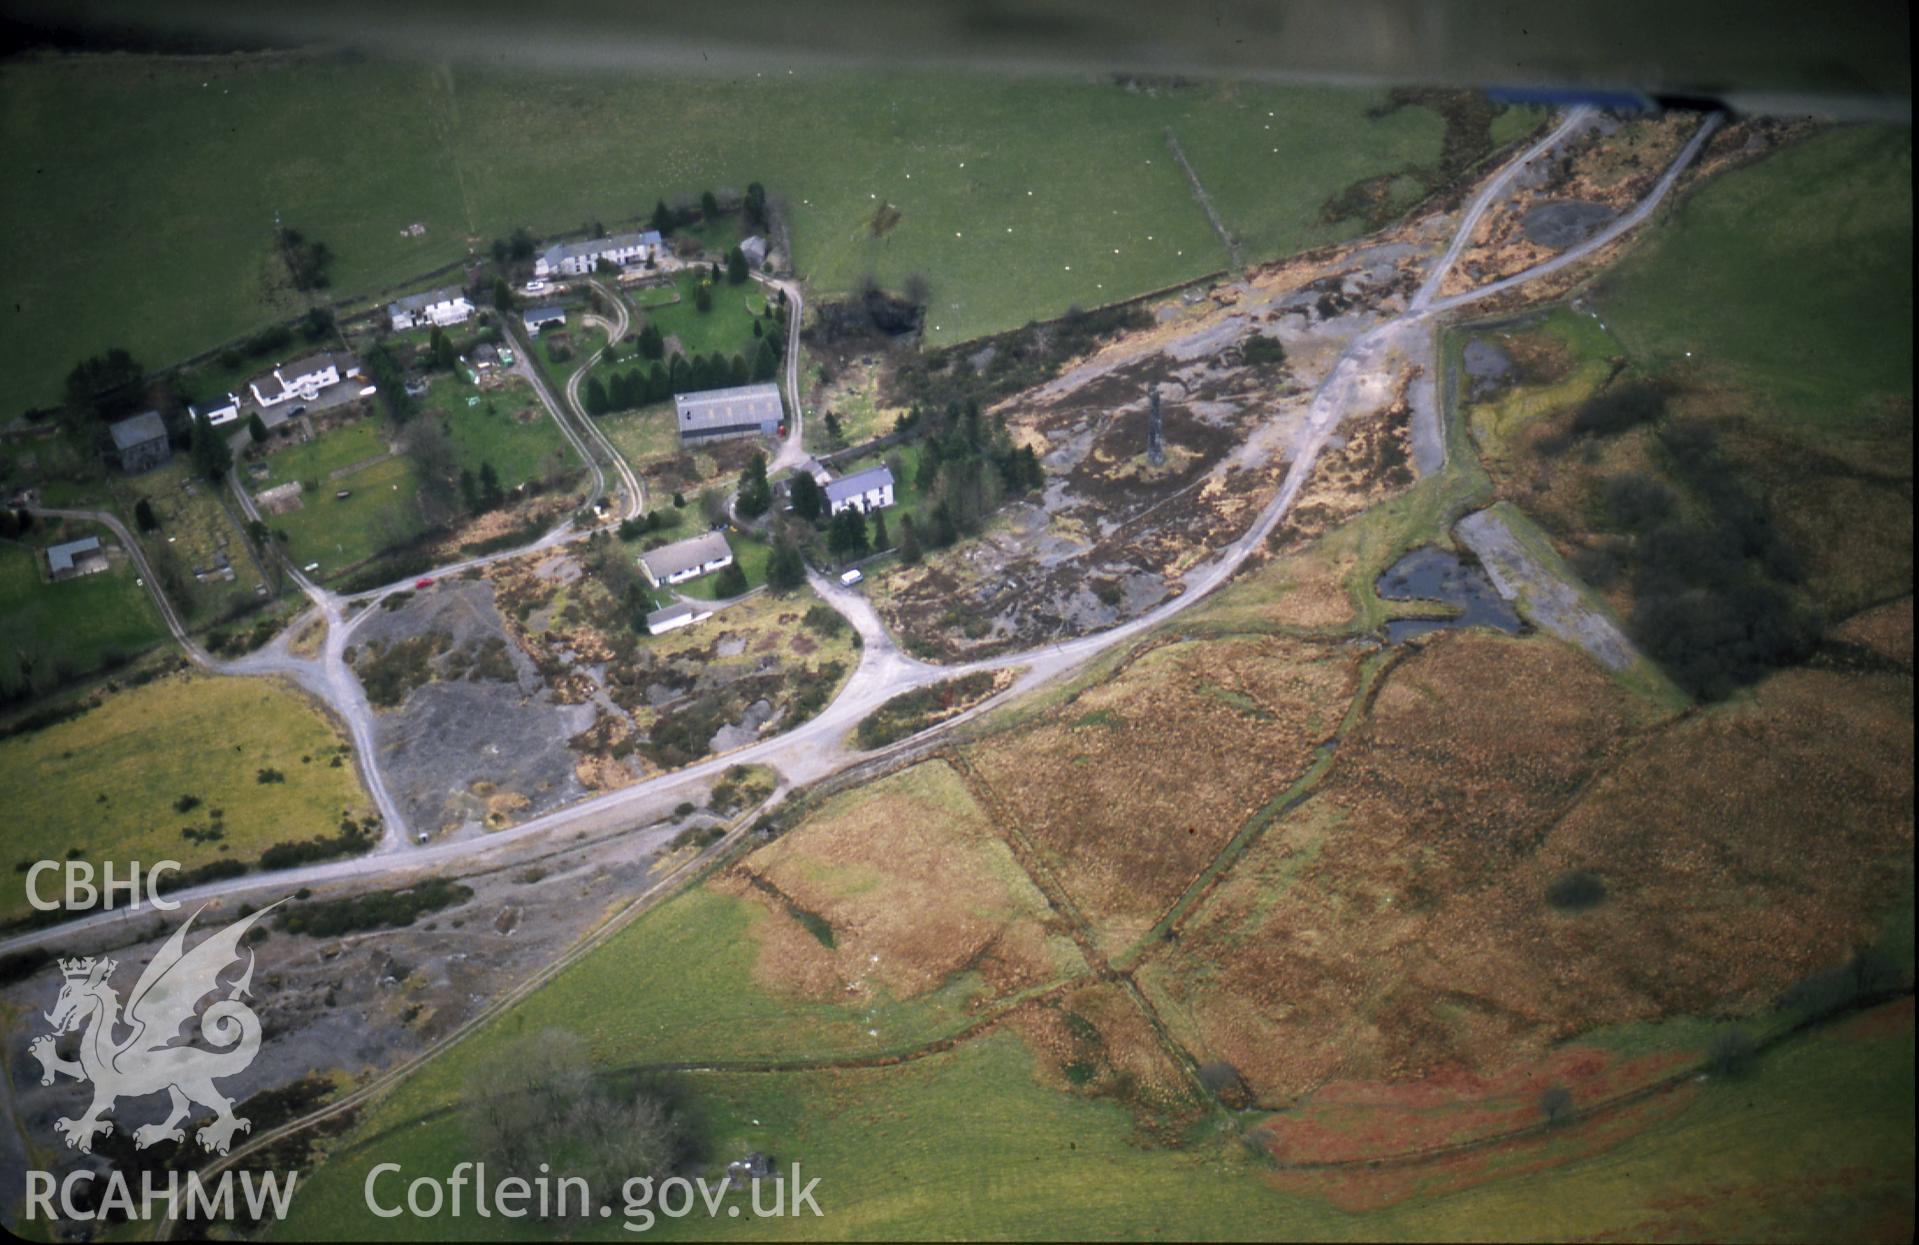 RCAHMW colour slide oblique aerial photograph of Cwmsymlog Lead Mine, Trefeurig, taken on 19/03/1999 by Toby Driver